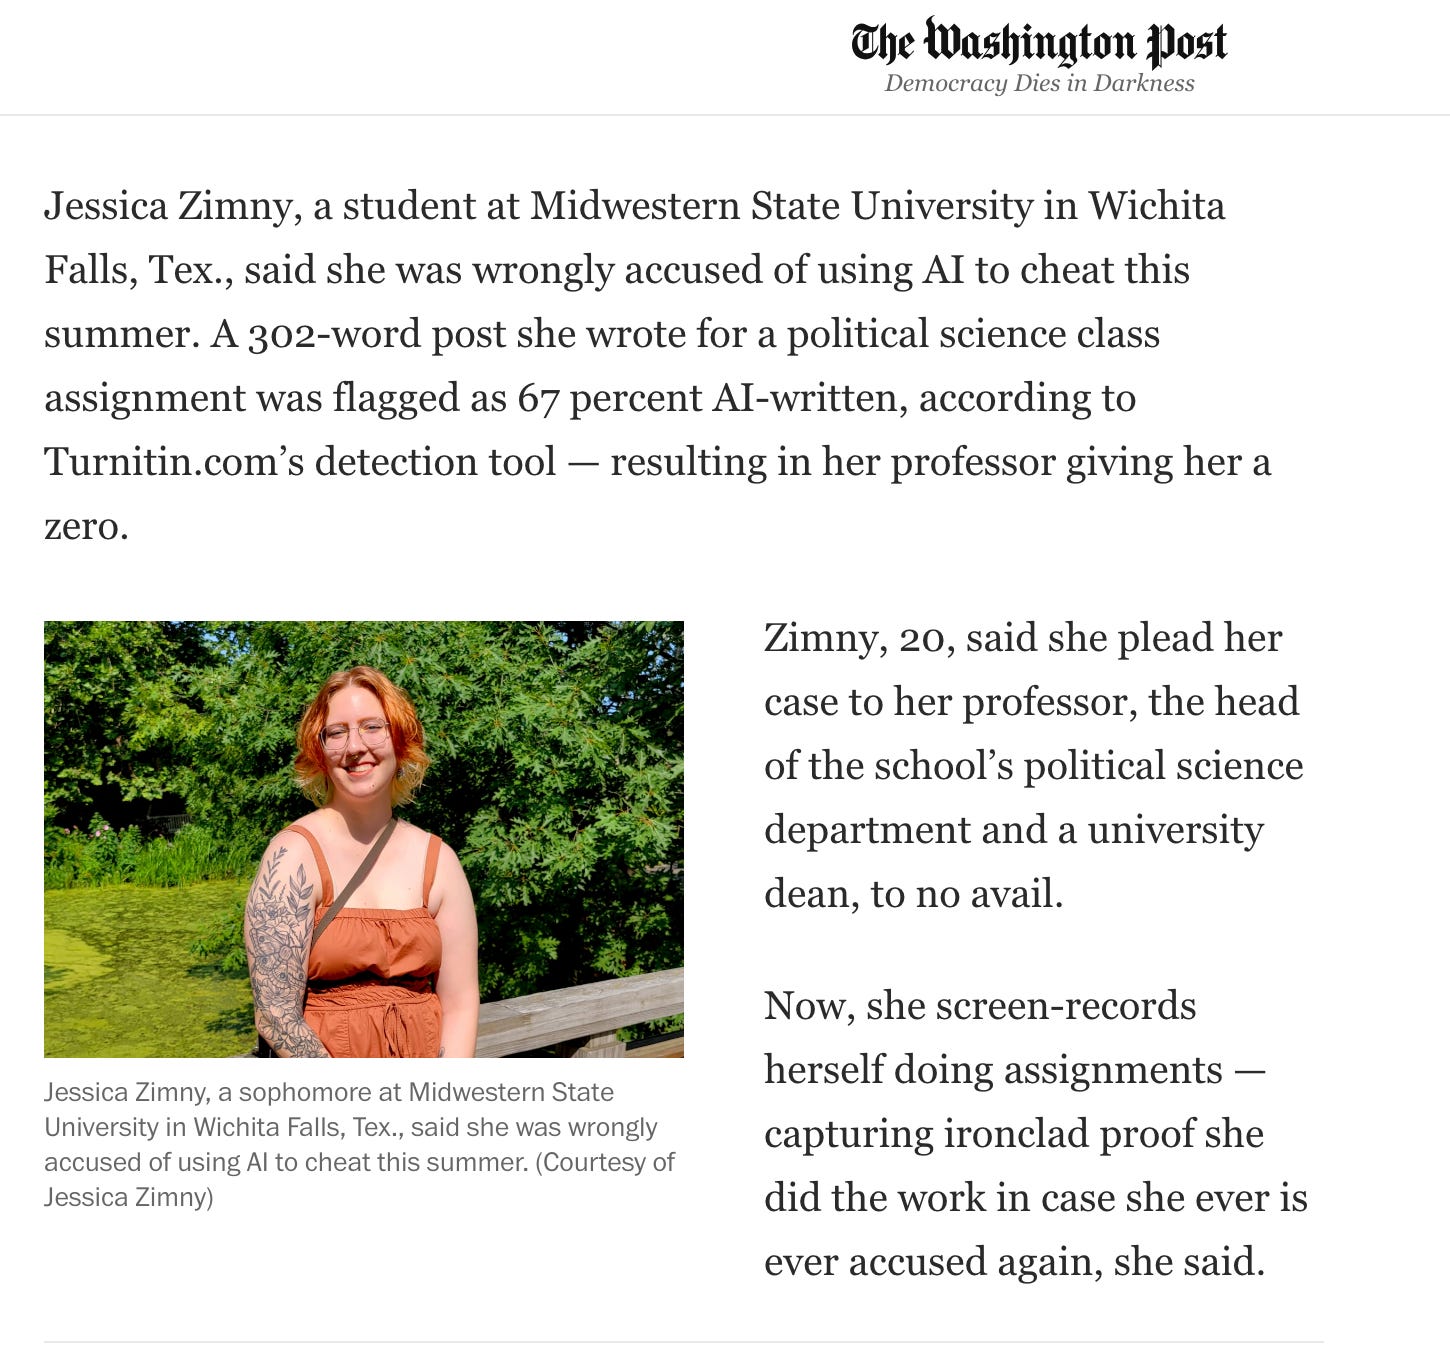 Jessica Zimny, a student at Midwestern State University in Wichita Falls, Tex., said she was wrongly accused of using AI to cheat this summer. A 302-word post she wrote for a political science class assignment was flagged as 67 percent AI-written, according to Turnitin.com’s detection tool — resulting in her professor giving her a zero.   Jessica Zimny, a sophomore at Midwestern State University in Wichita Falls, Tex., said she was wrongly accused of using AI to cheat this summer. (Courtesy of Jessica Zimny) Zimny, 20, said she plead her case to her professor, the head of the school’s political science department and a university dean, to no avail.  Now, she screen-records herself doing assignments — capturing ironclad proof she did the work in case she ever is ever accused again, she said.